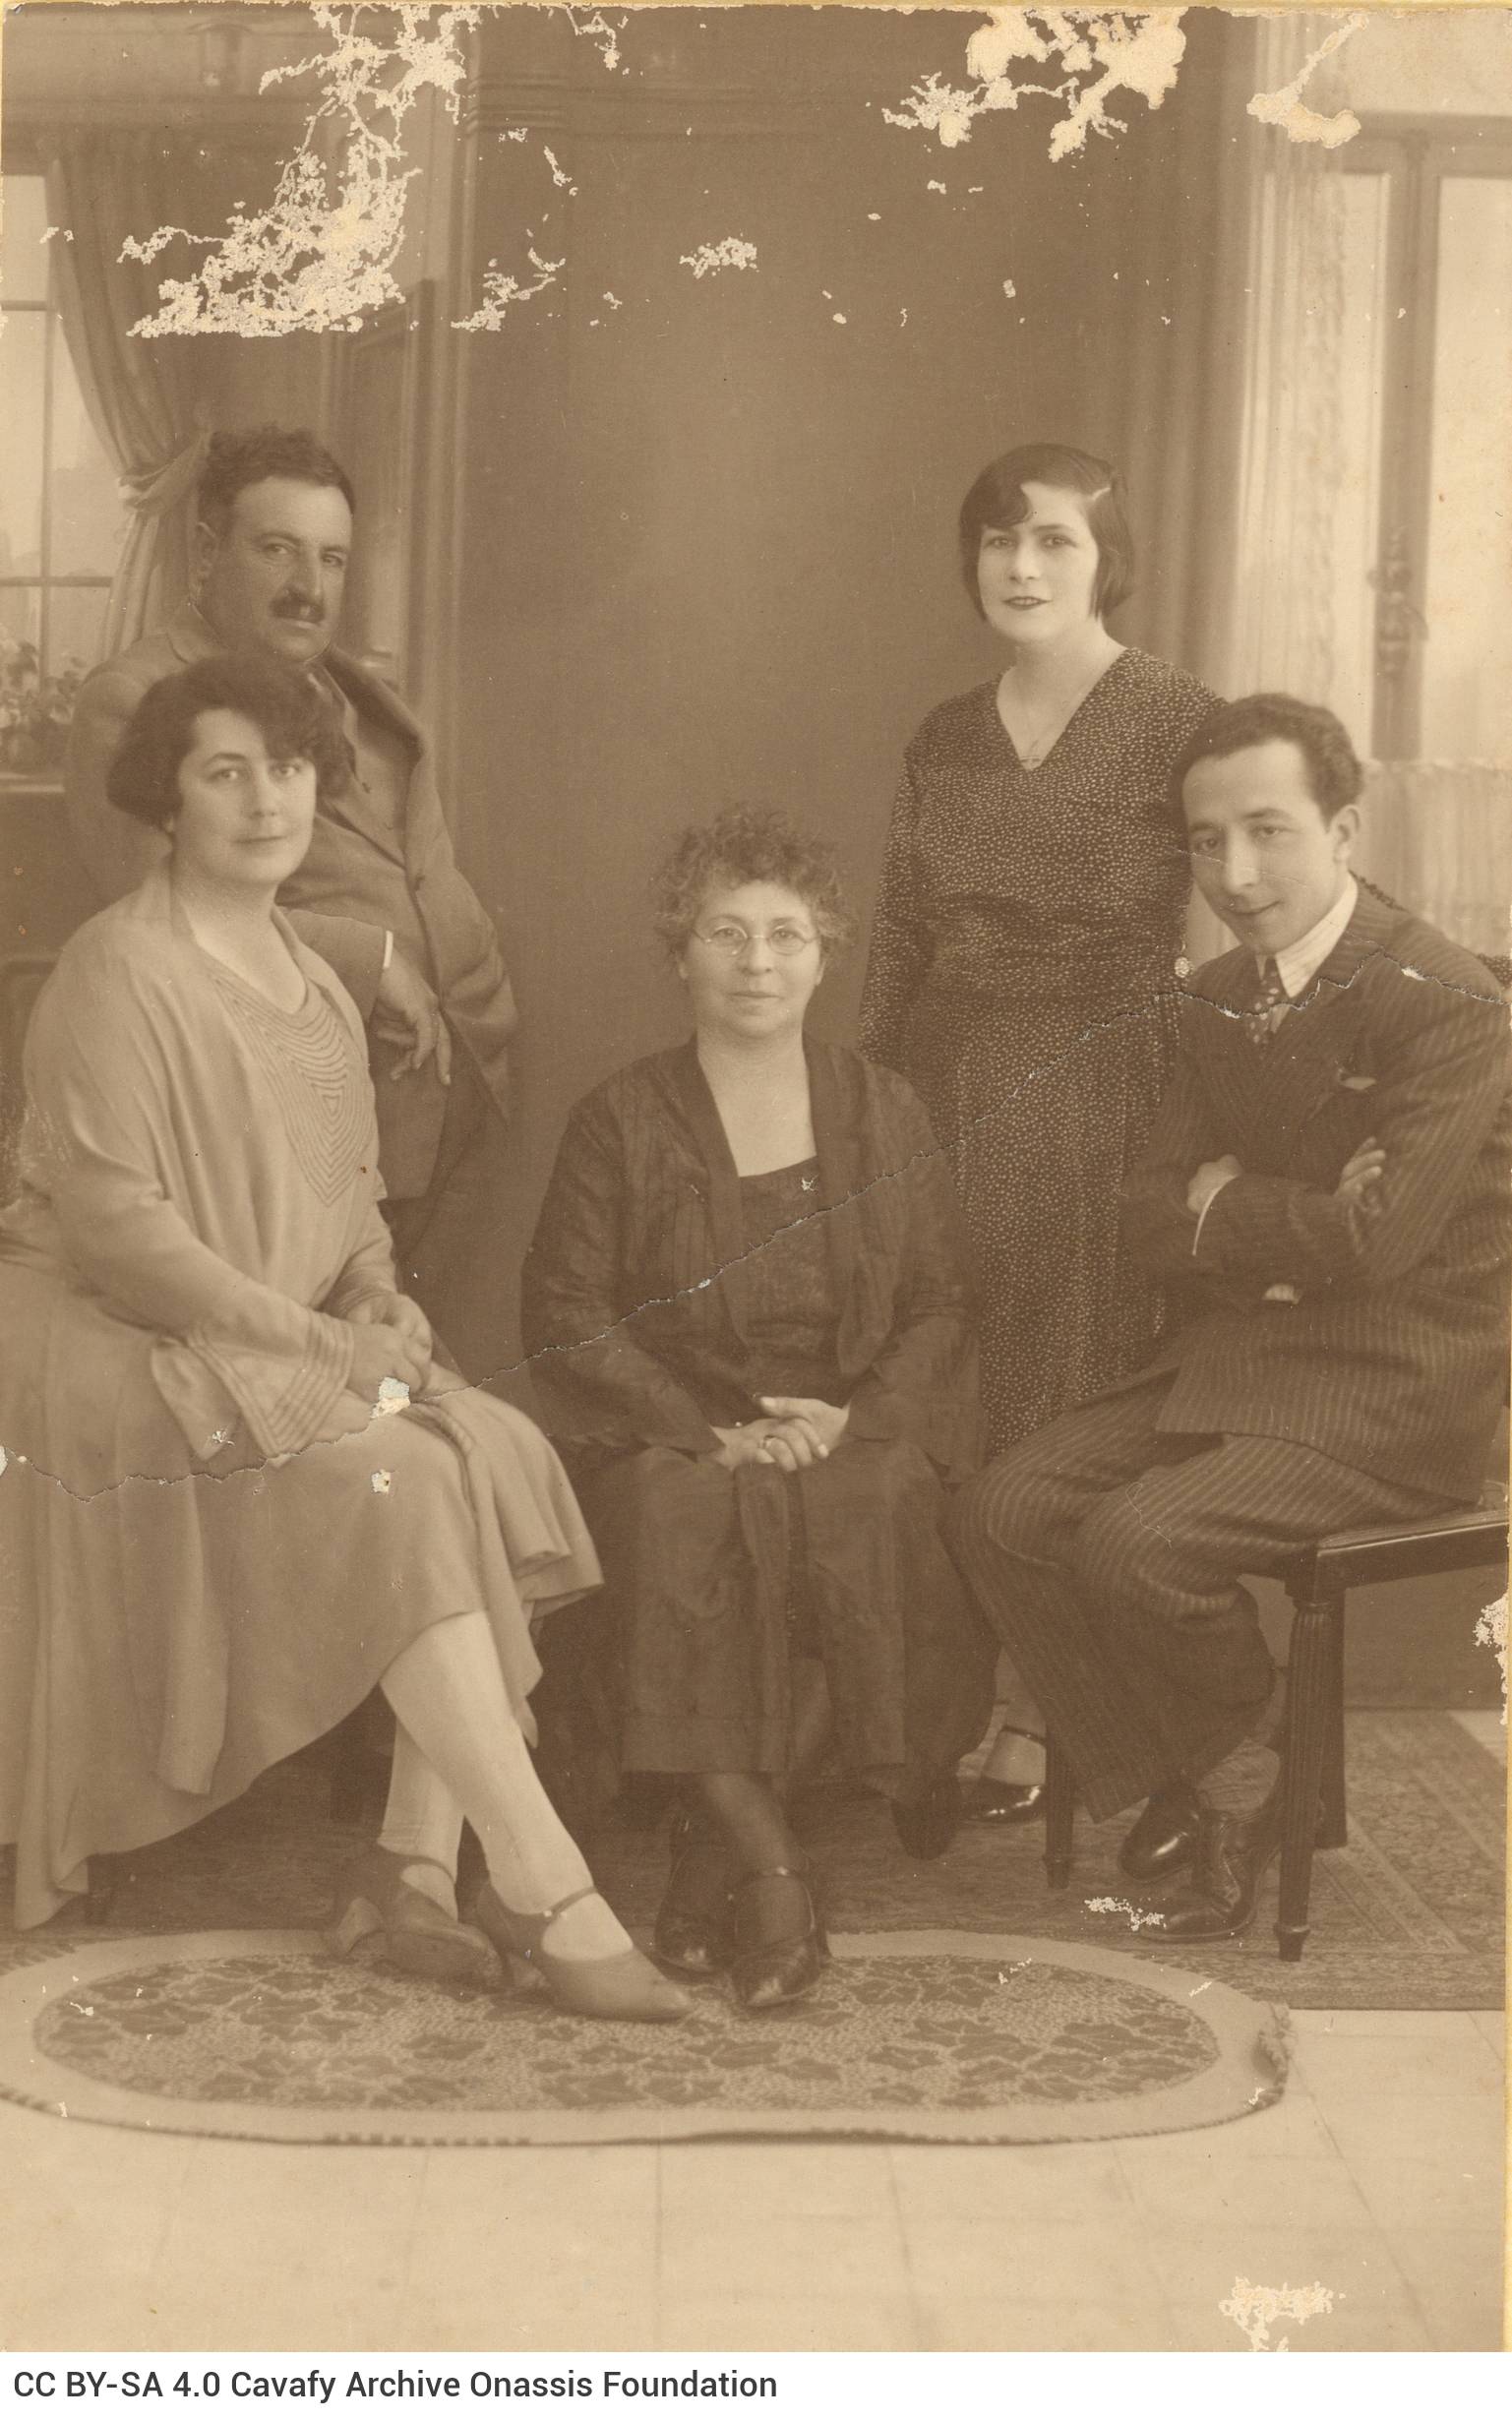 Photograph of D. Stefanopoulos with members of his family and Alekos Singopoulo (last on the right). Handwritten dedication t